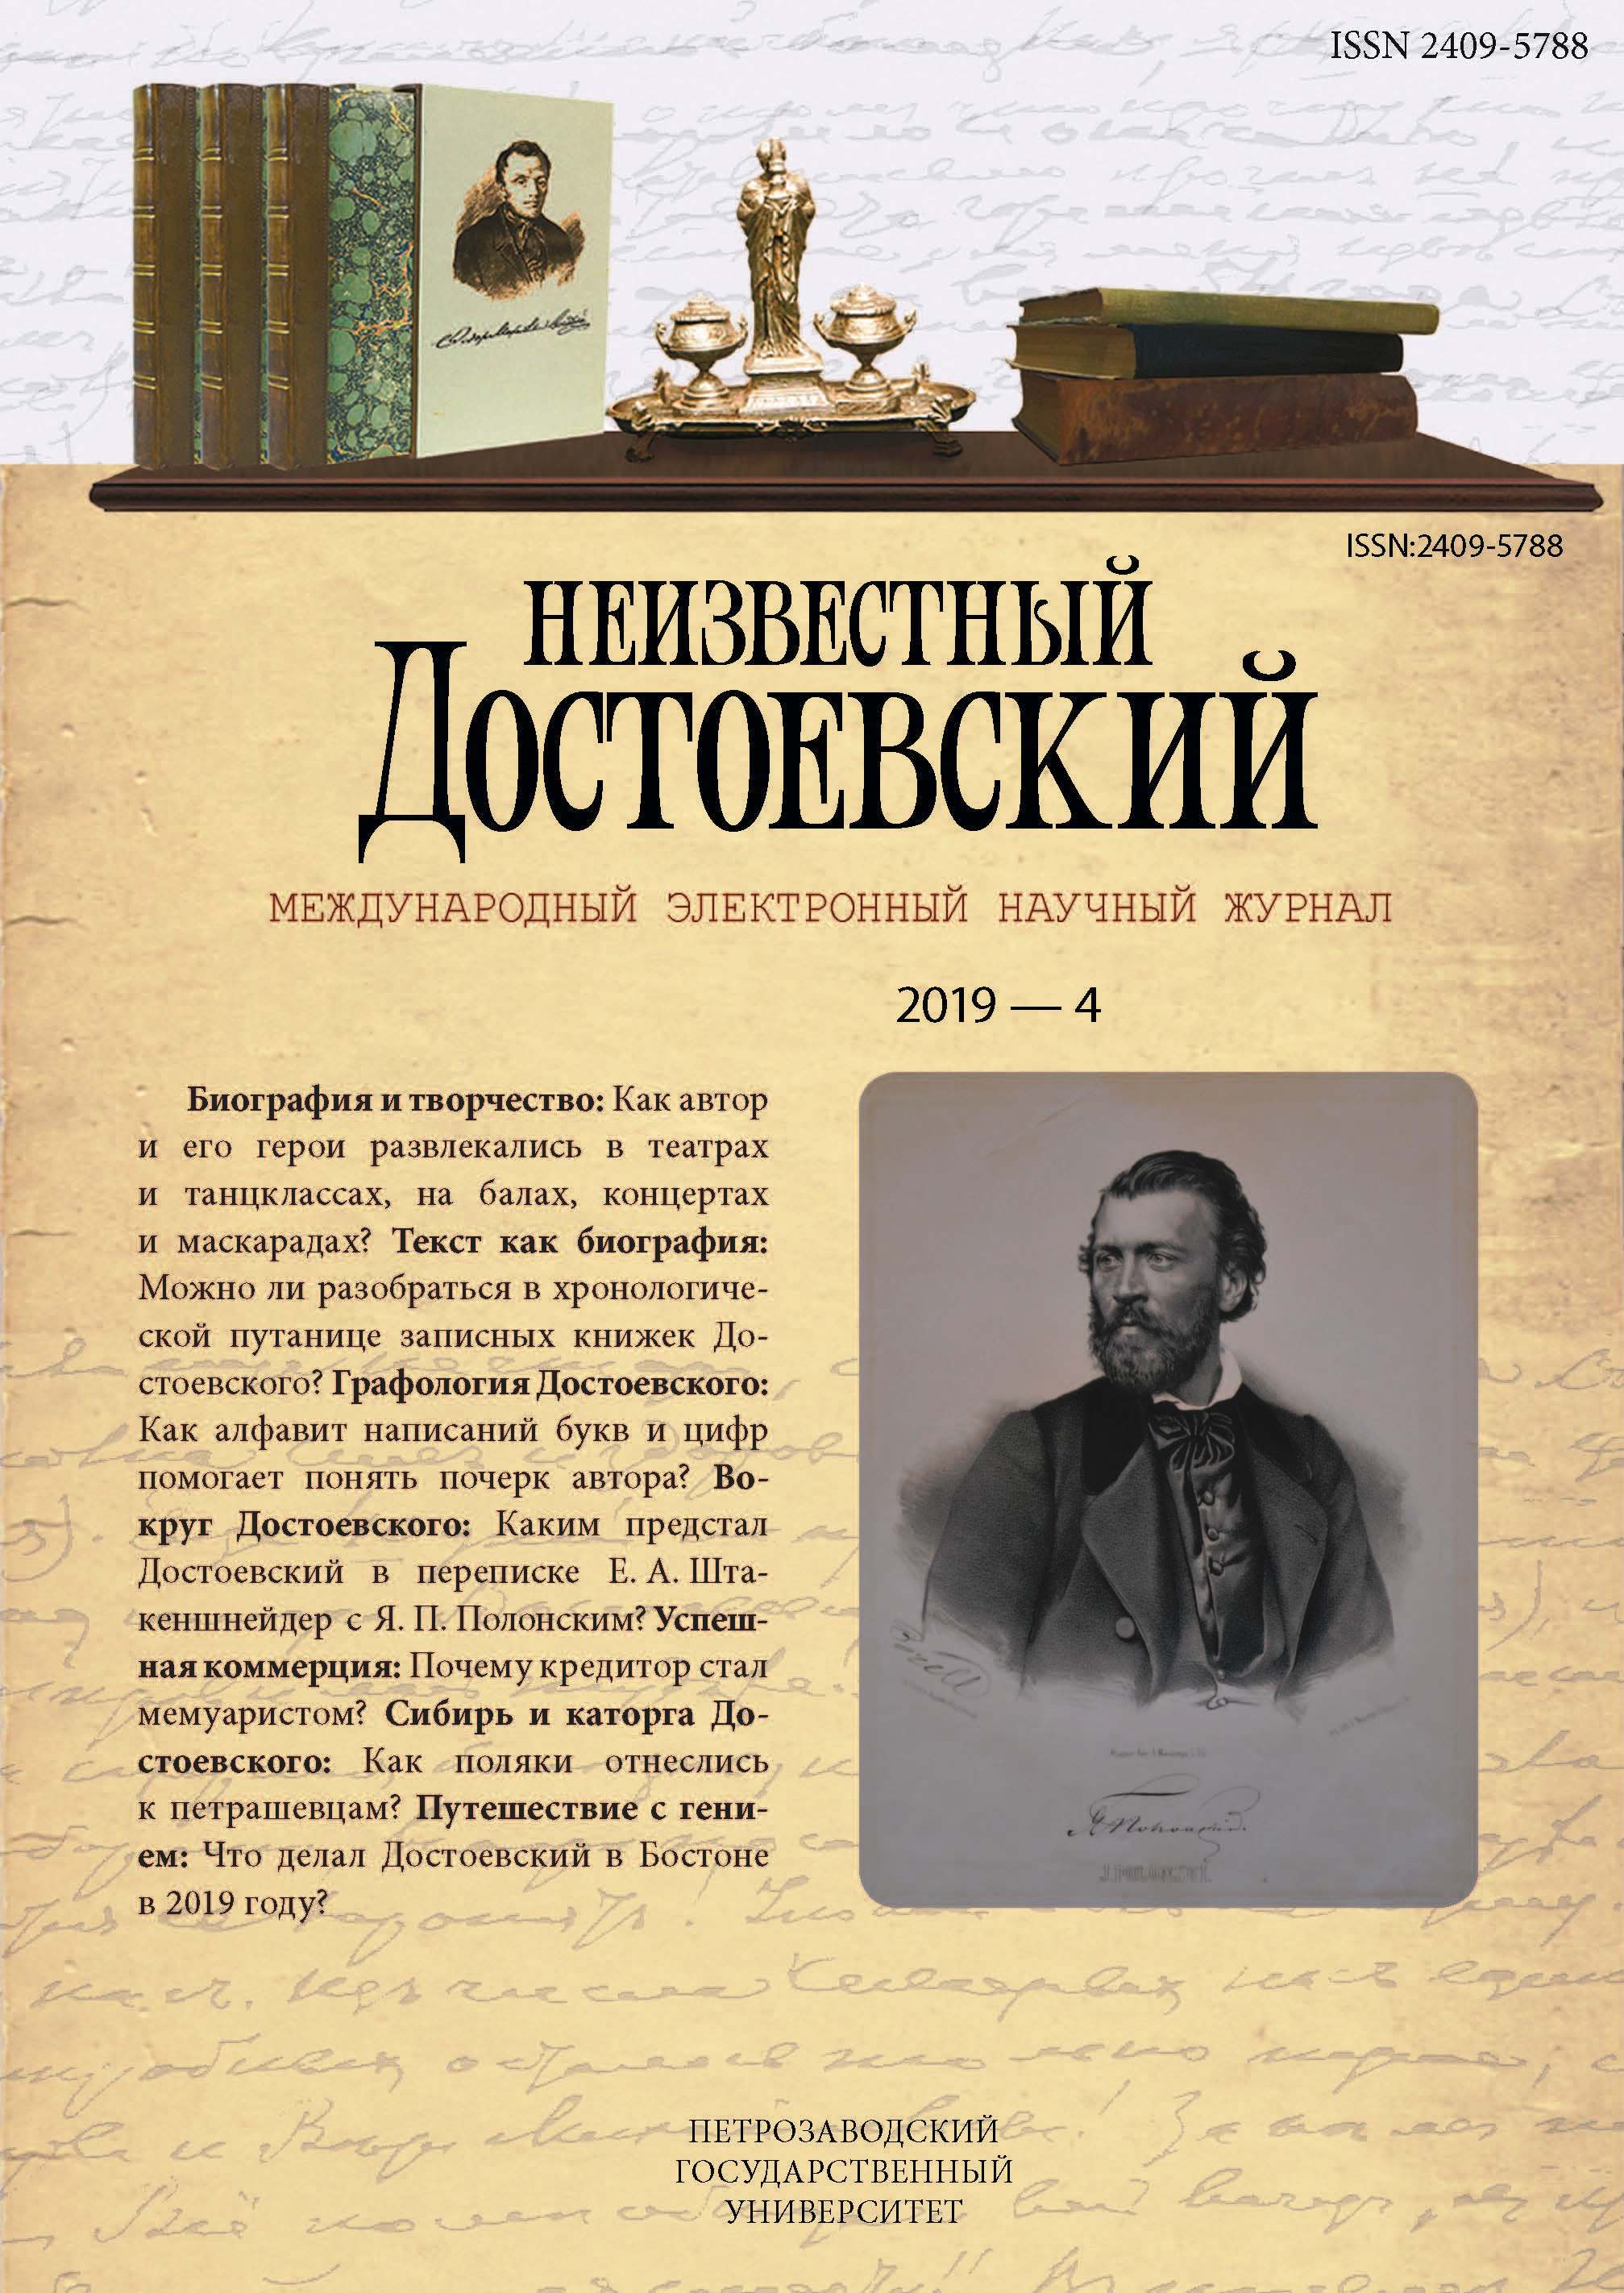 Following F. M. Dostoevsky’s Ways: the Poles in Siberia Cover Image